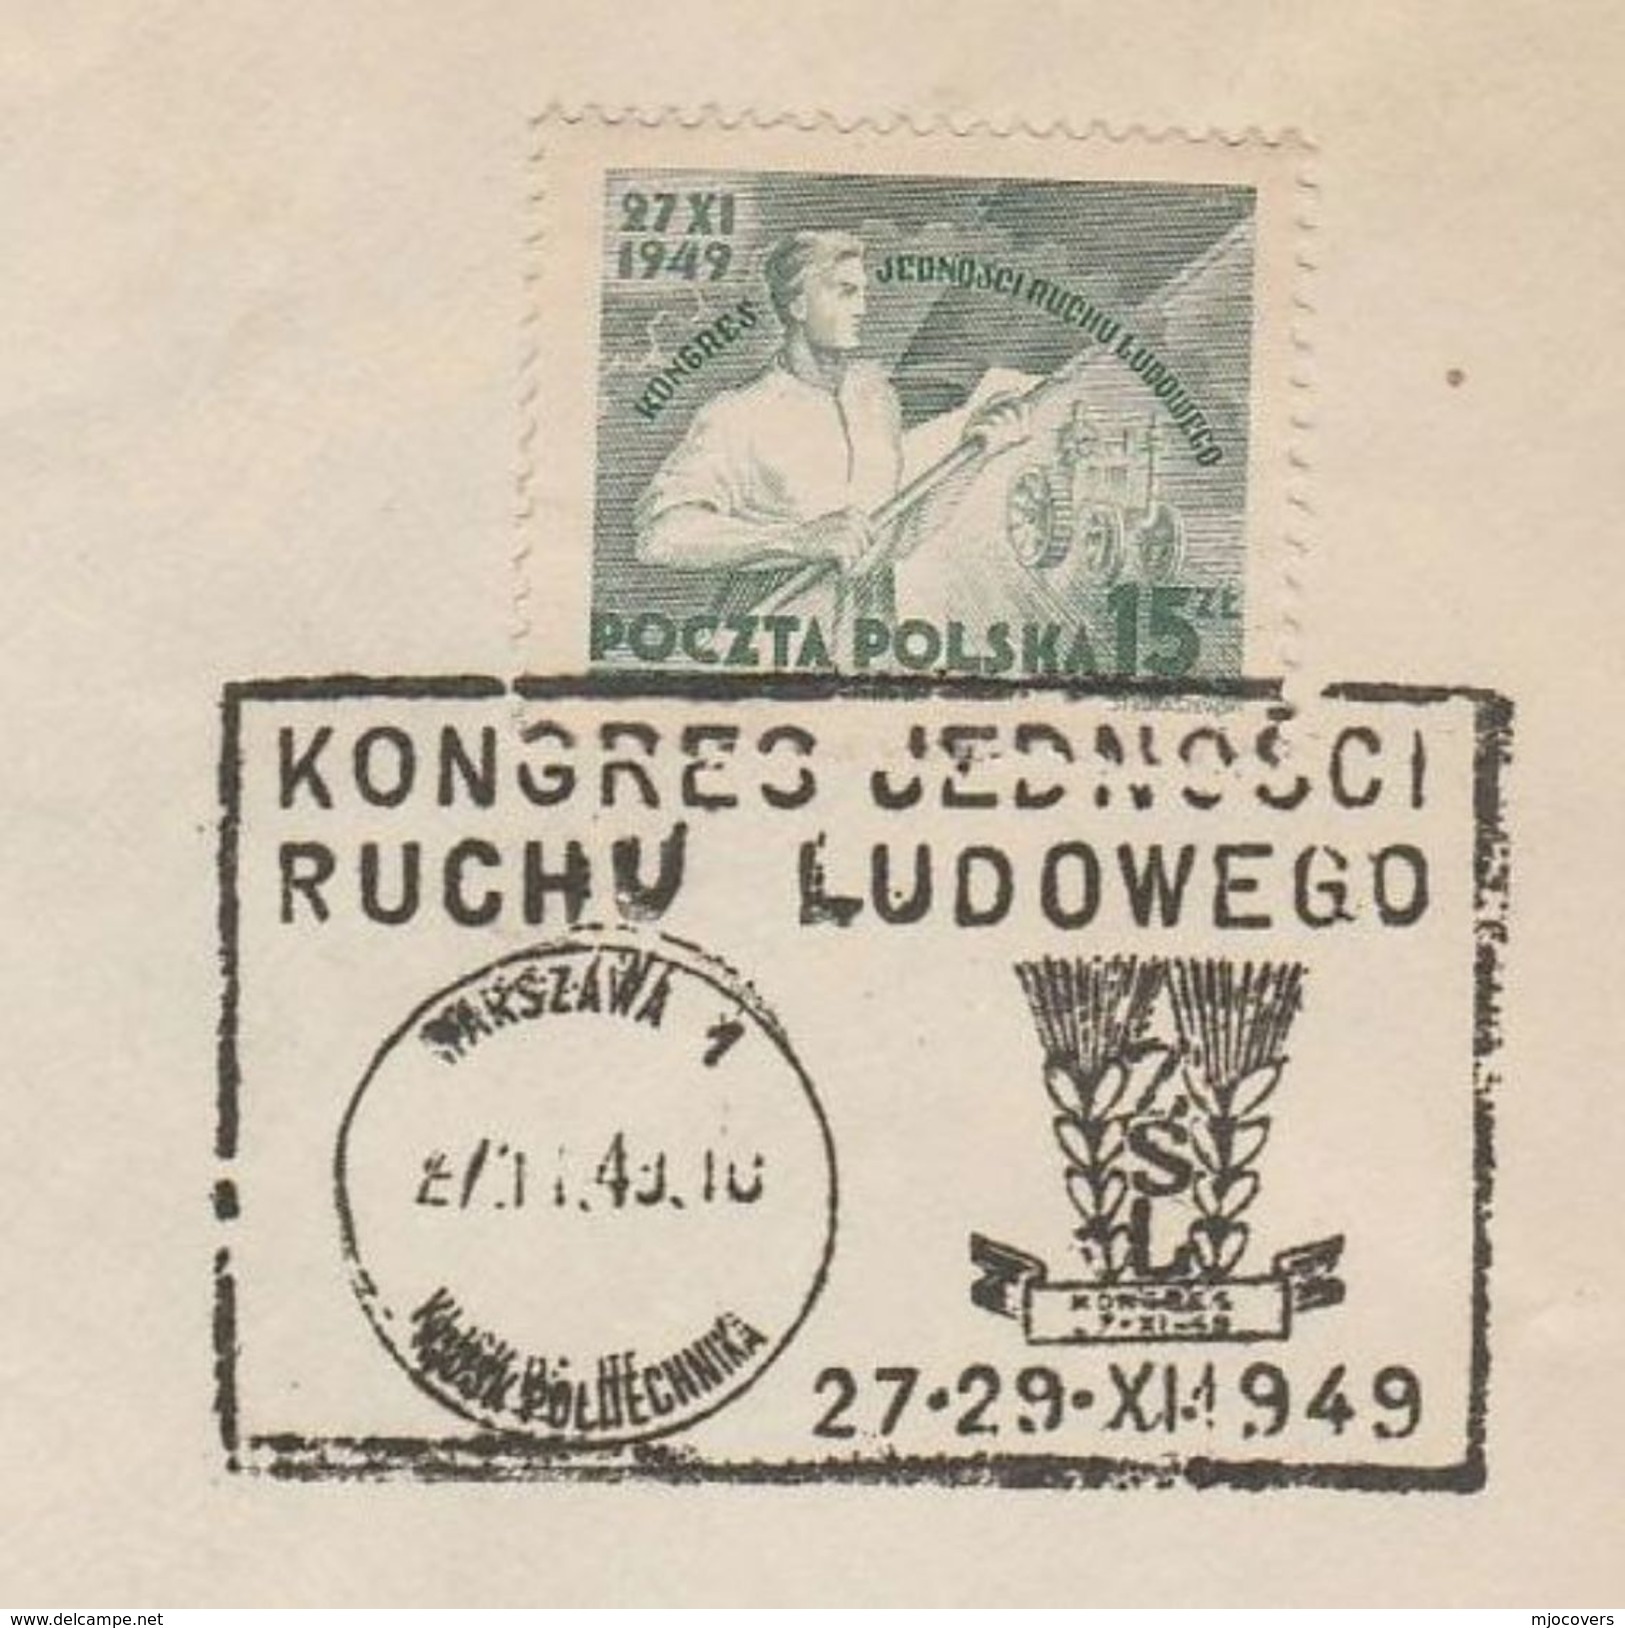 1949 POLAND COVER TRACTOR Stamps EVENT Pmk Kongres Jednosci Ruchu Ludowego Farming Agriculture - Agriculture